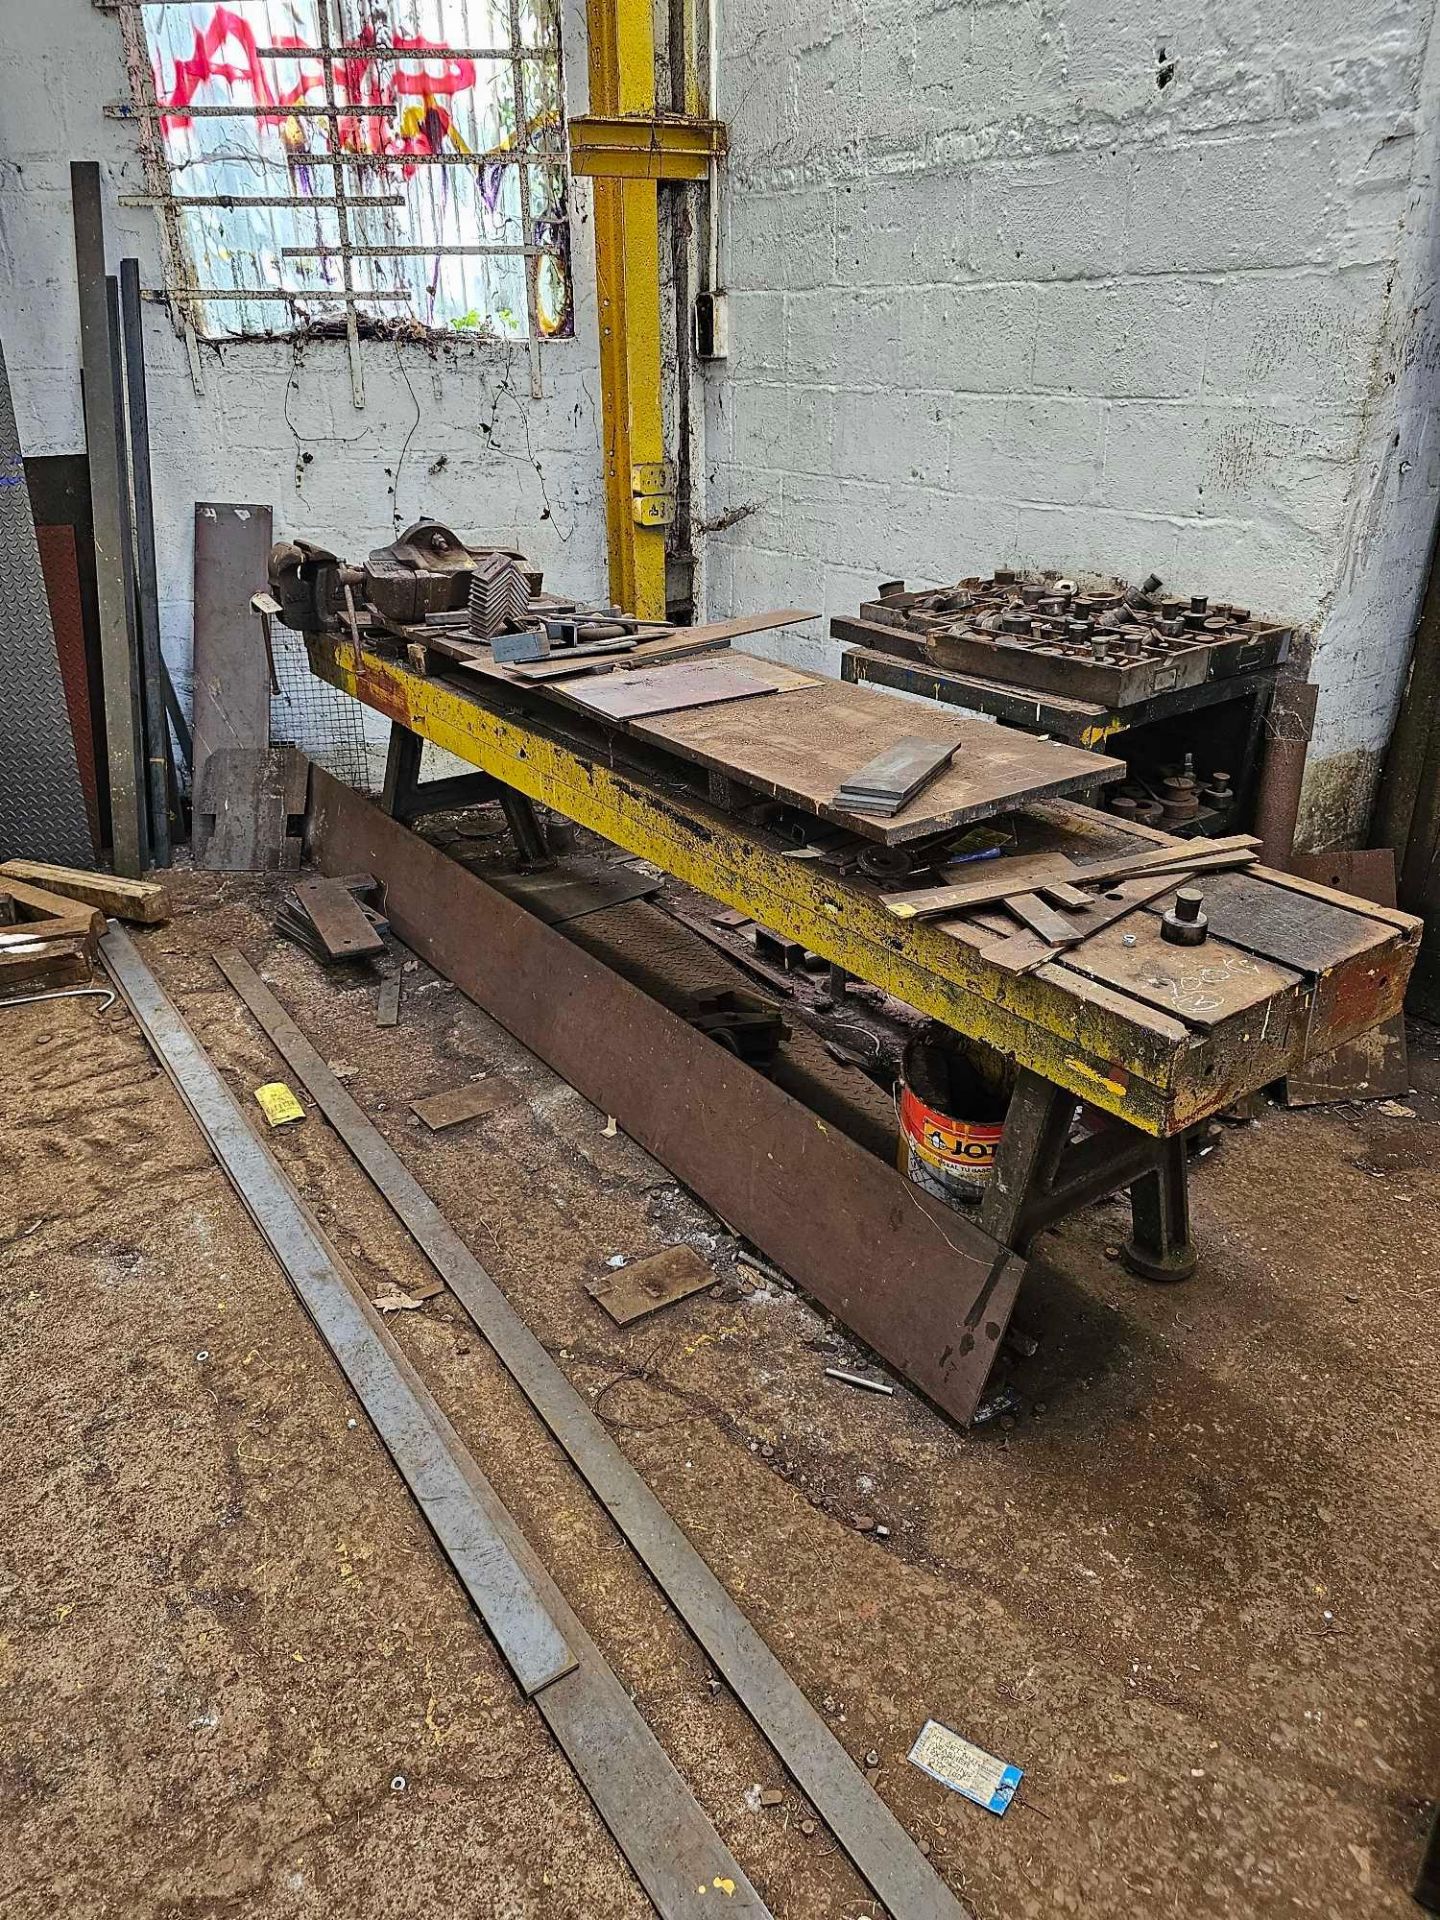 Cast Steel Engineers Marking Out Work Bench 306 x 56 x 83cm Weight 700kg Complete With 2 x Vices - Image 2 of 3